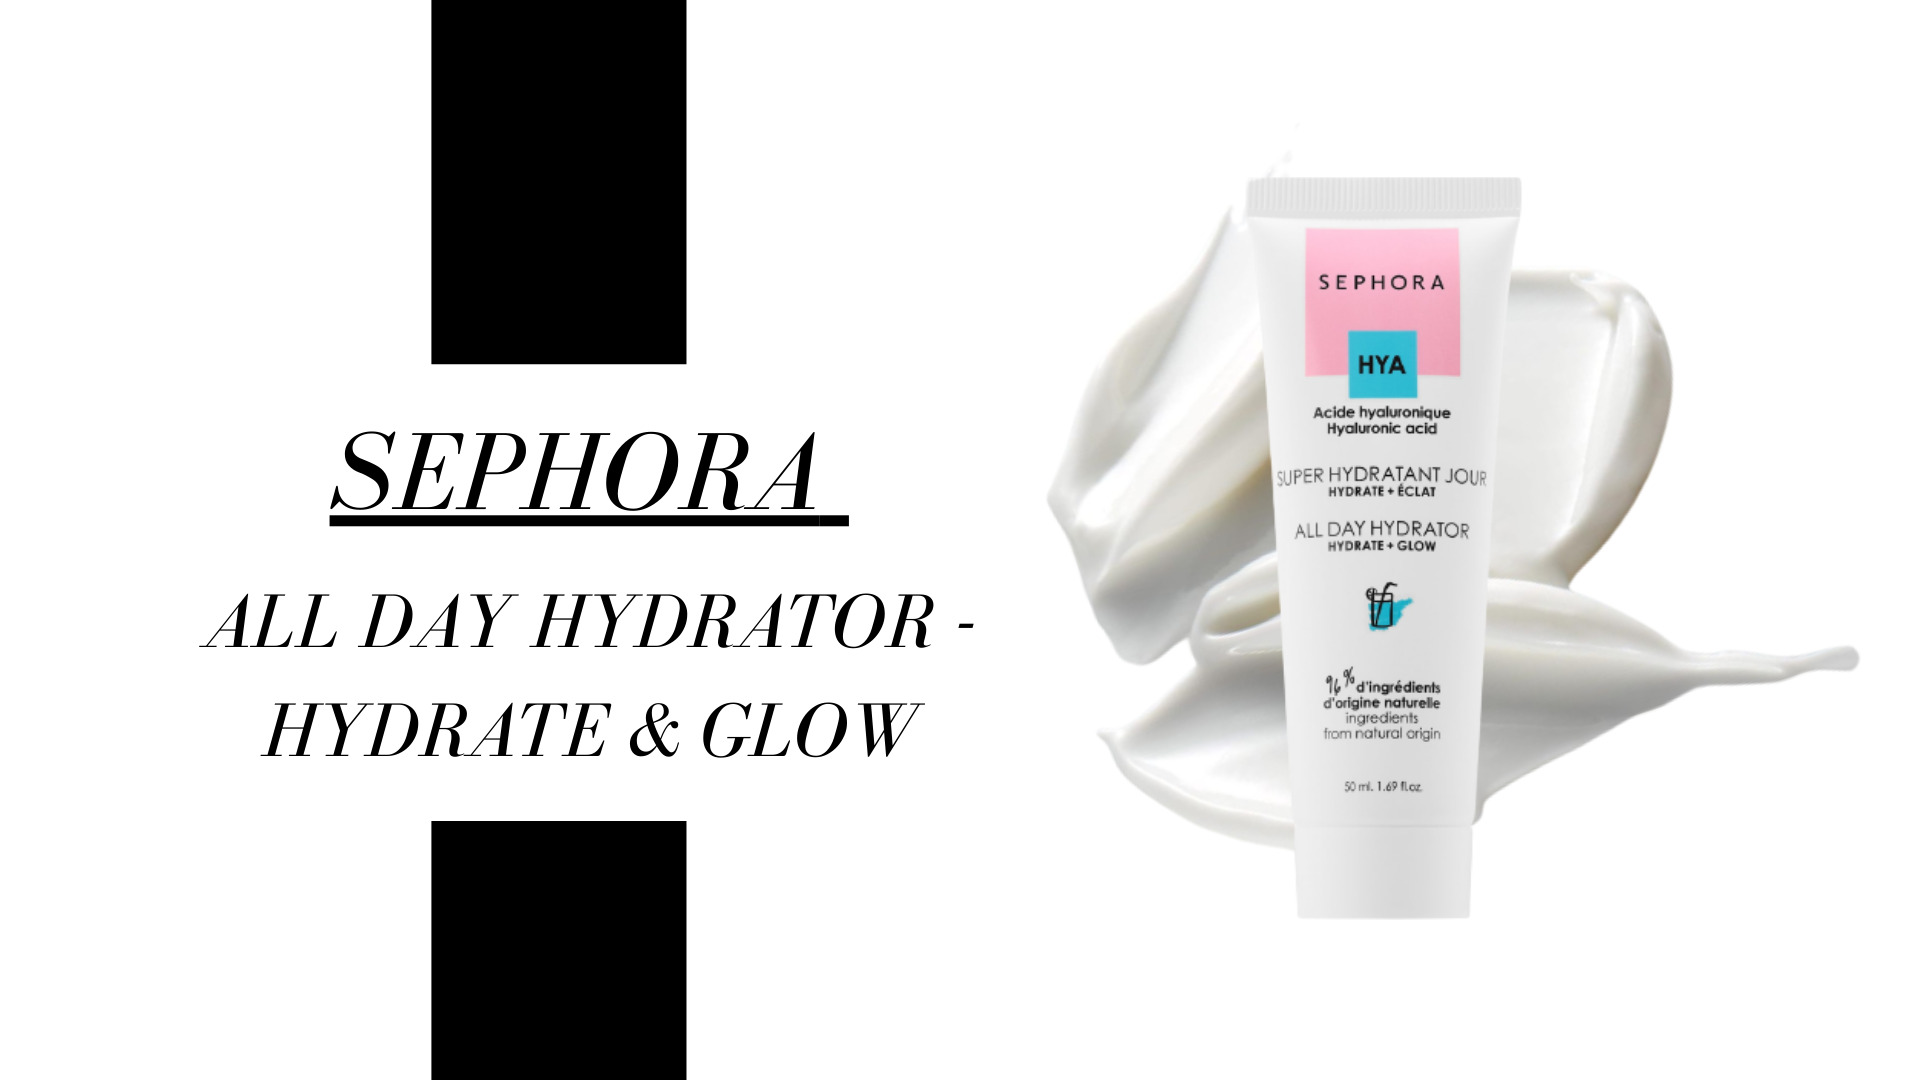 Sephora Collection has been growing its skincare collection so much. Did, you notice? They have amazing new products that have great formulas! Plus they are actually very affordable.